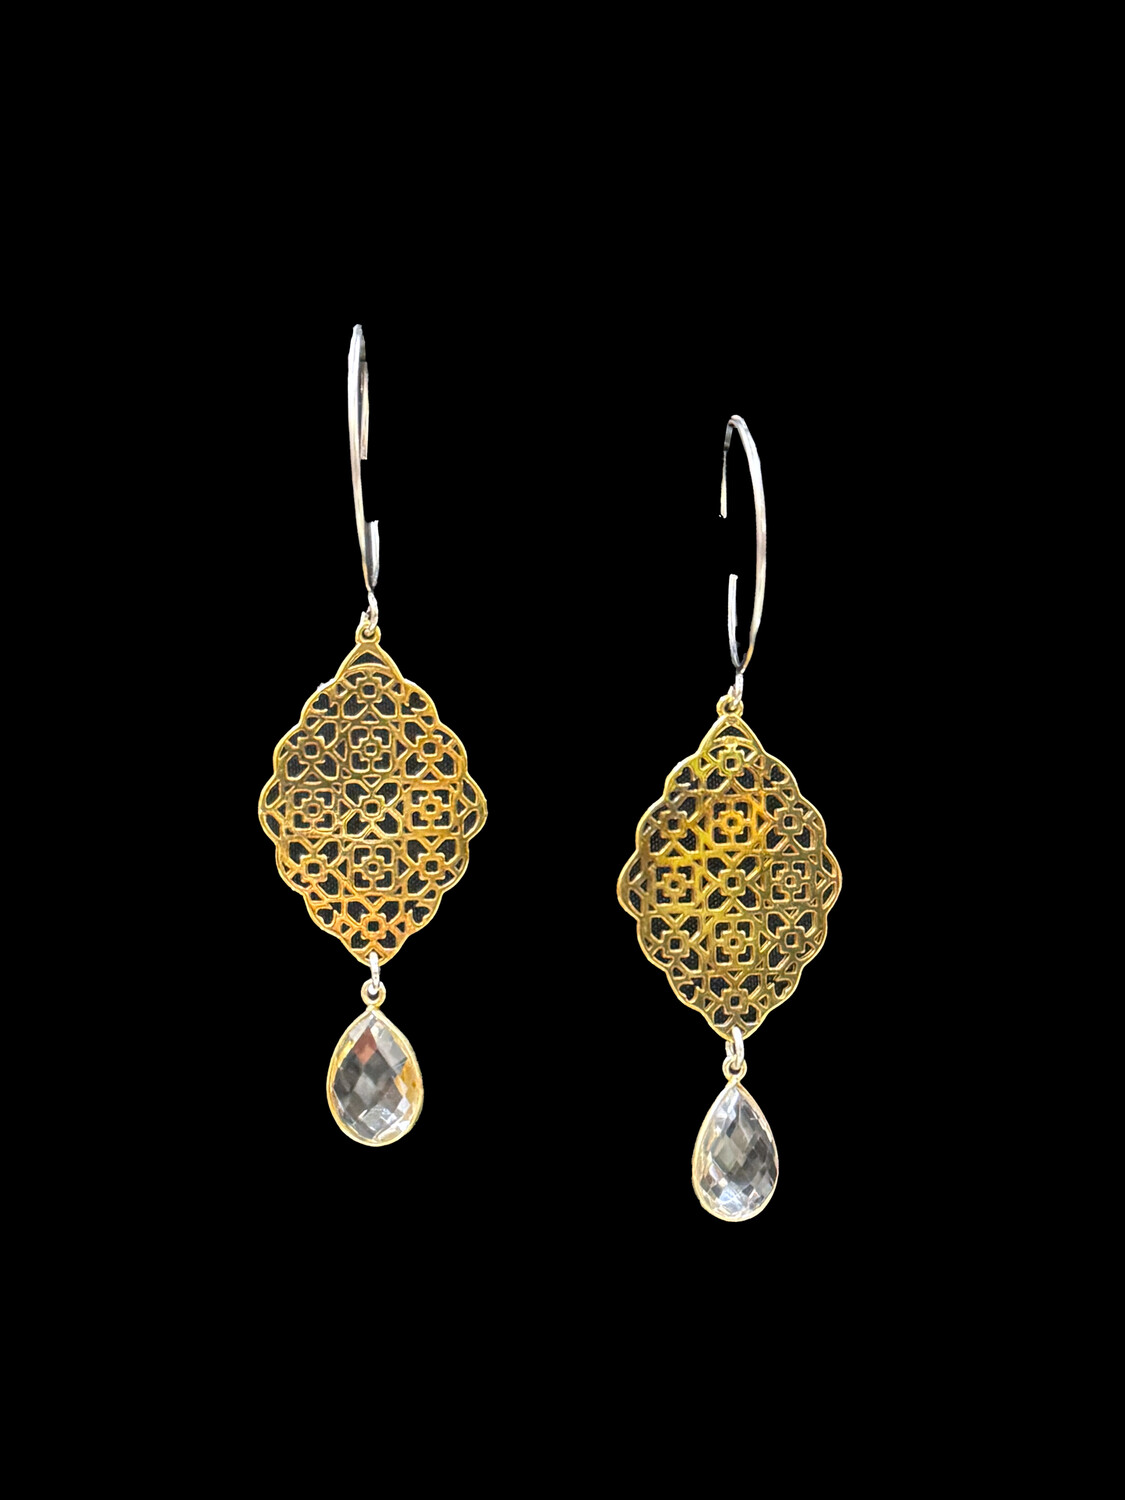 Hoop Earrings With Large Gold Plated Geometric Arabesque and Cut Stone Drop